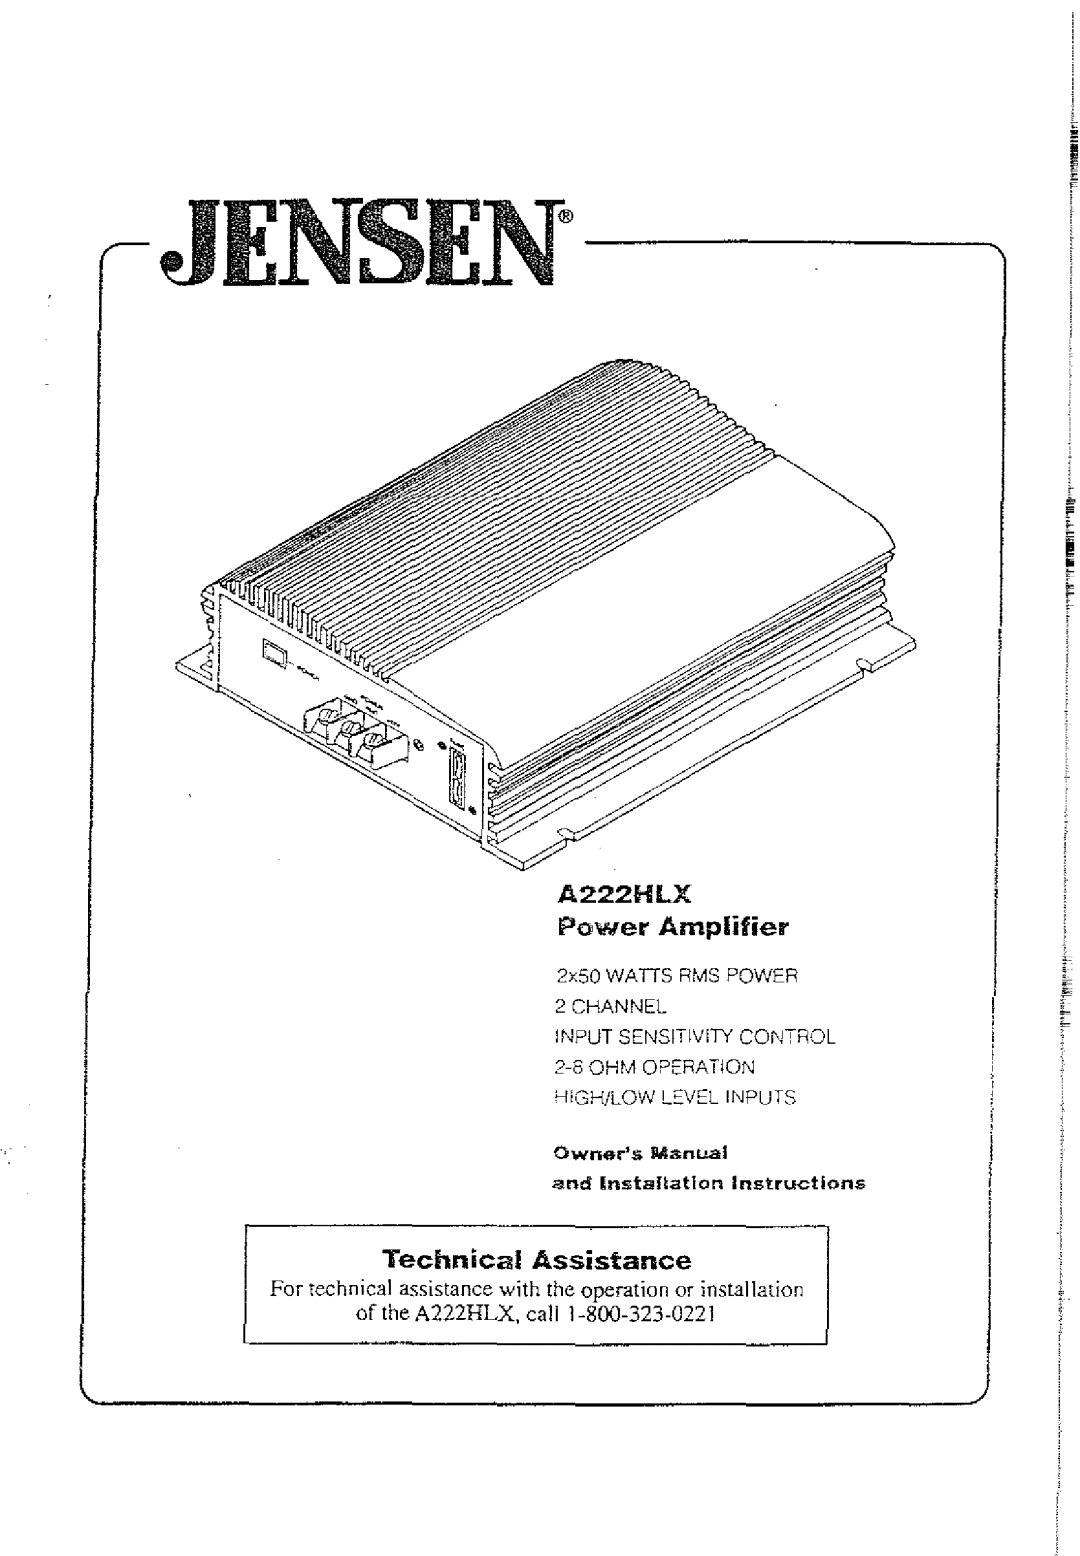 Jensen owner manual Power Amplifier, Technical Assistance, 2x50 WADS RMS POWER, of the A222HLX, call 